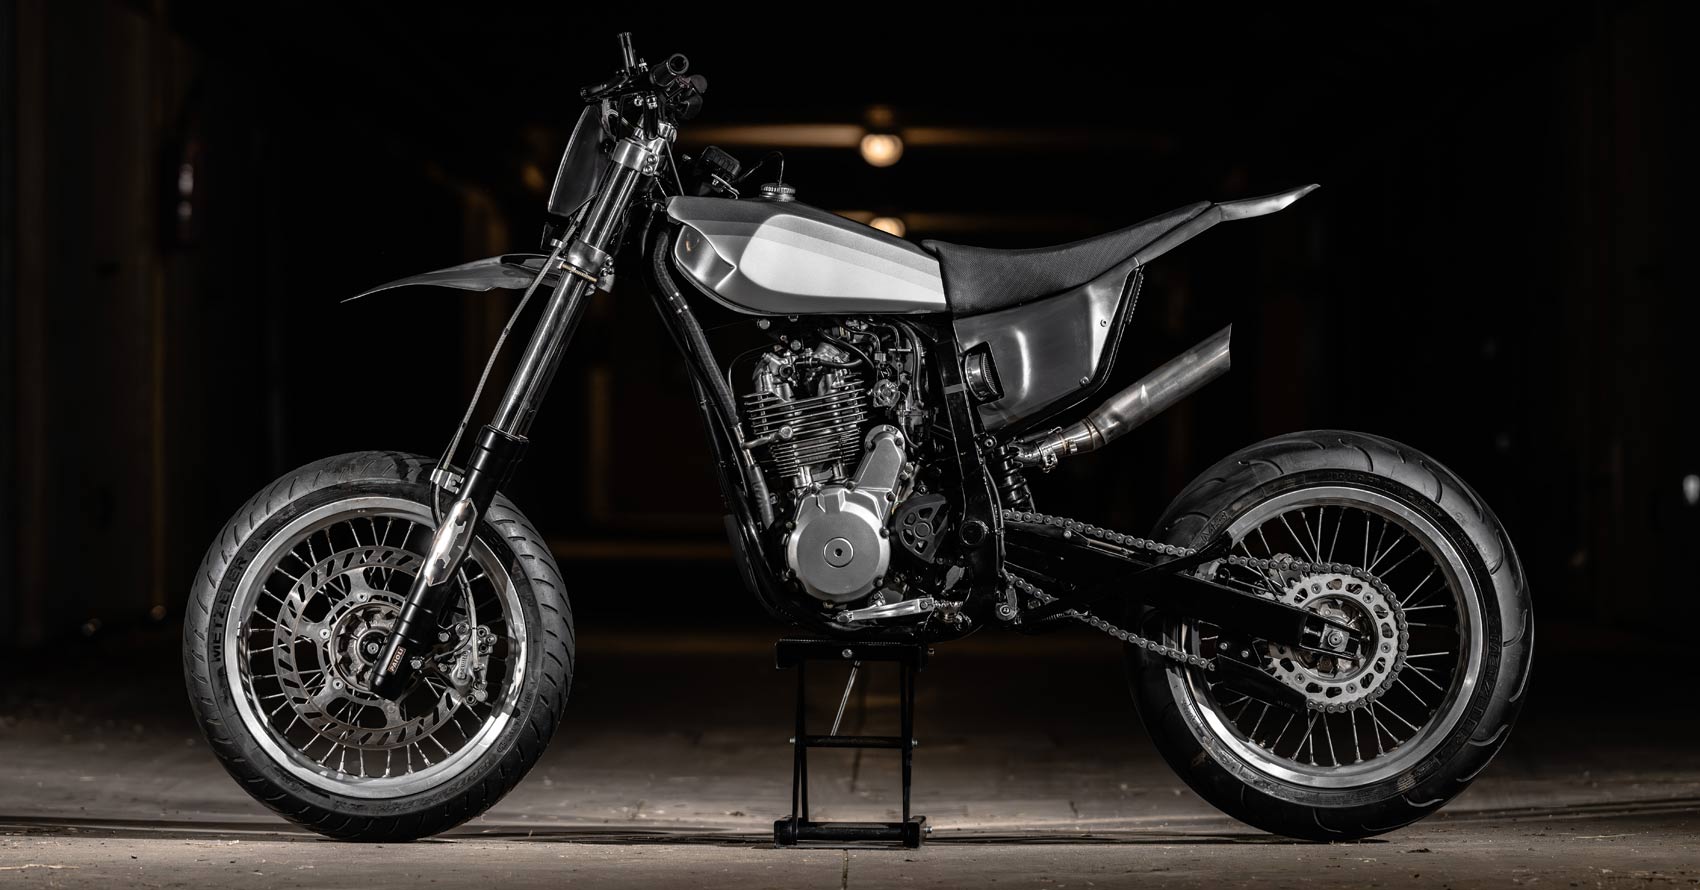 Metal Motard: A lean Beta M4 supermoto from Italy